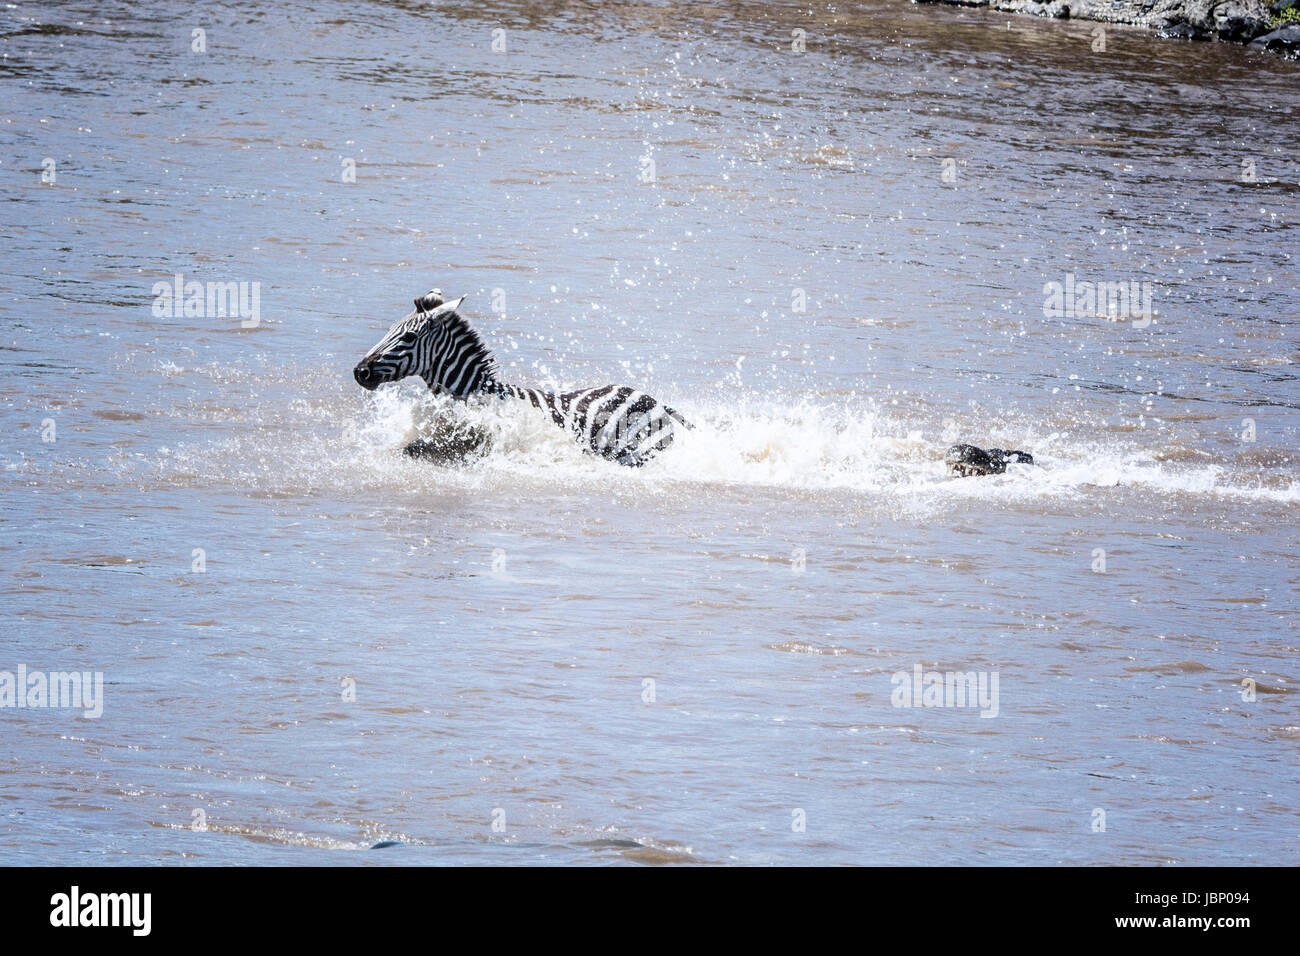 Common Zebra, Equus quagga burchellii, chased by a Crocodile, Crocodilus niloticus, crossing the Mara River during the Great Migration, Kenya, Africa Stock Photo